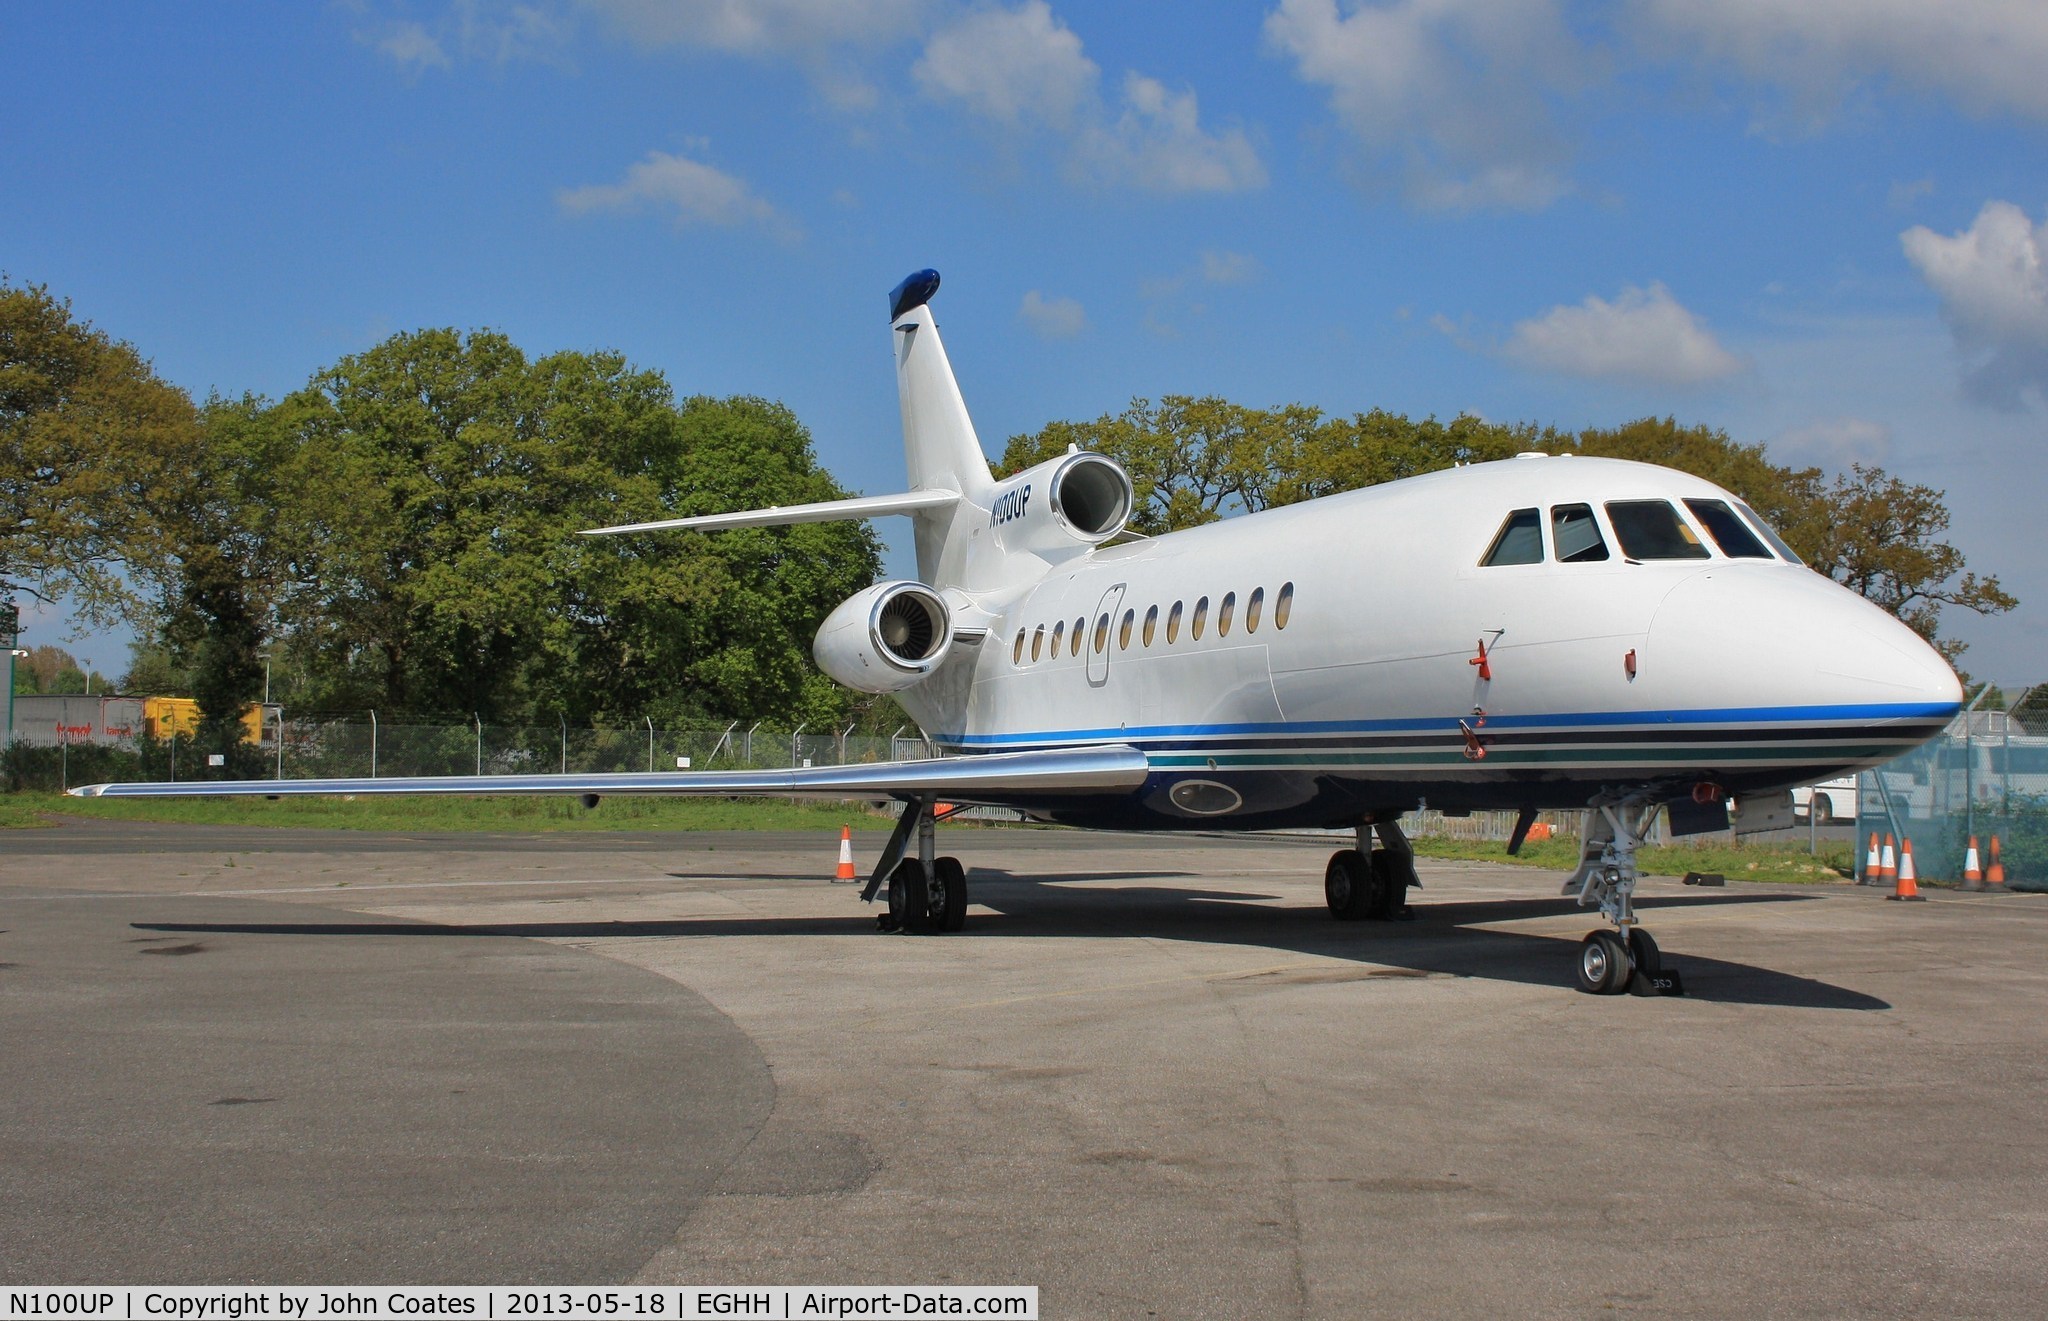 N100UP, 1988 Dassault Falcon 900 C/N 44, Parked at Signatures